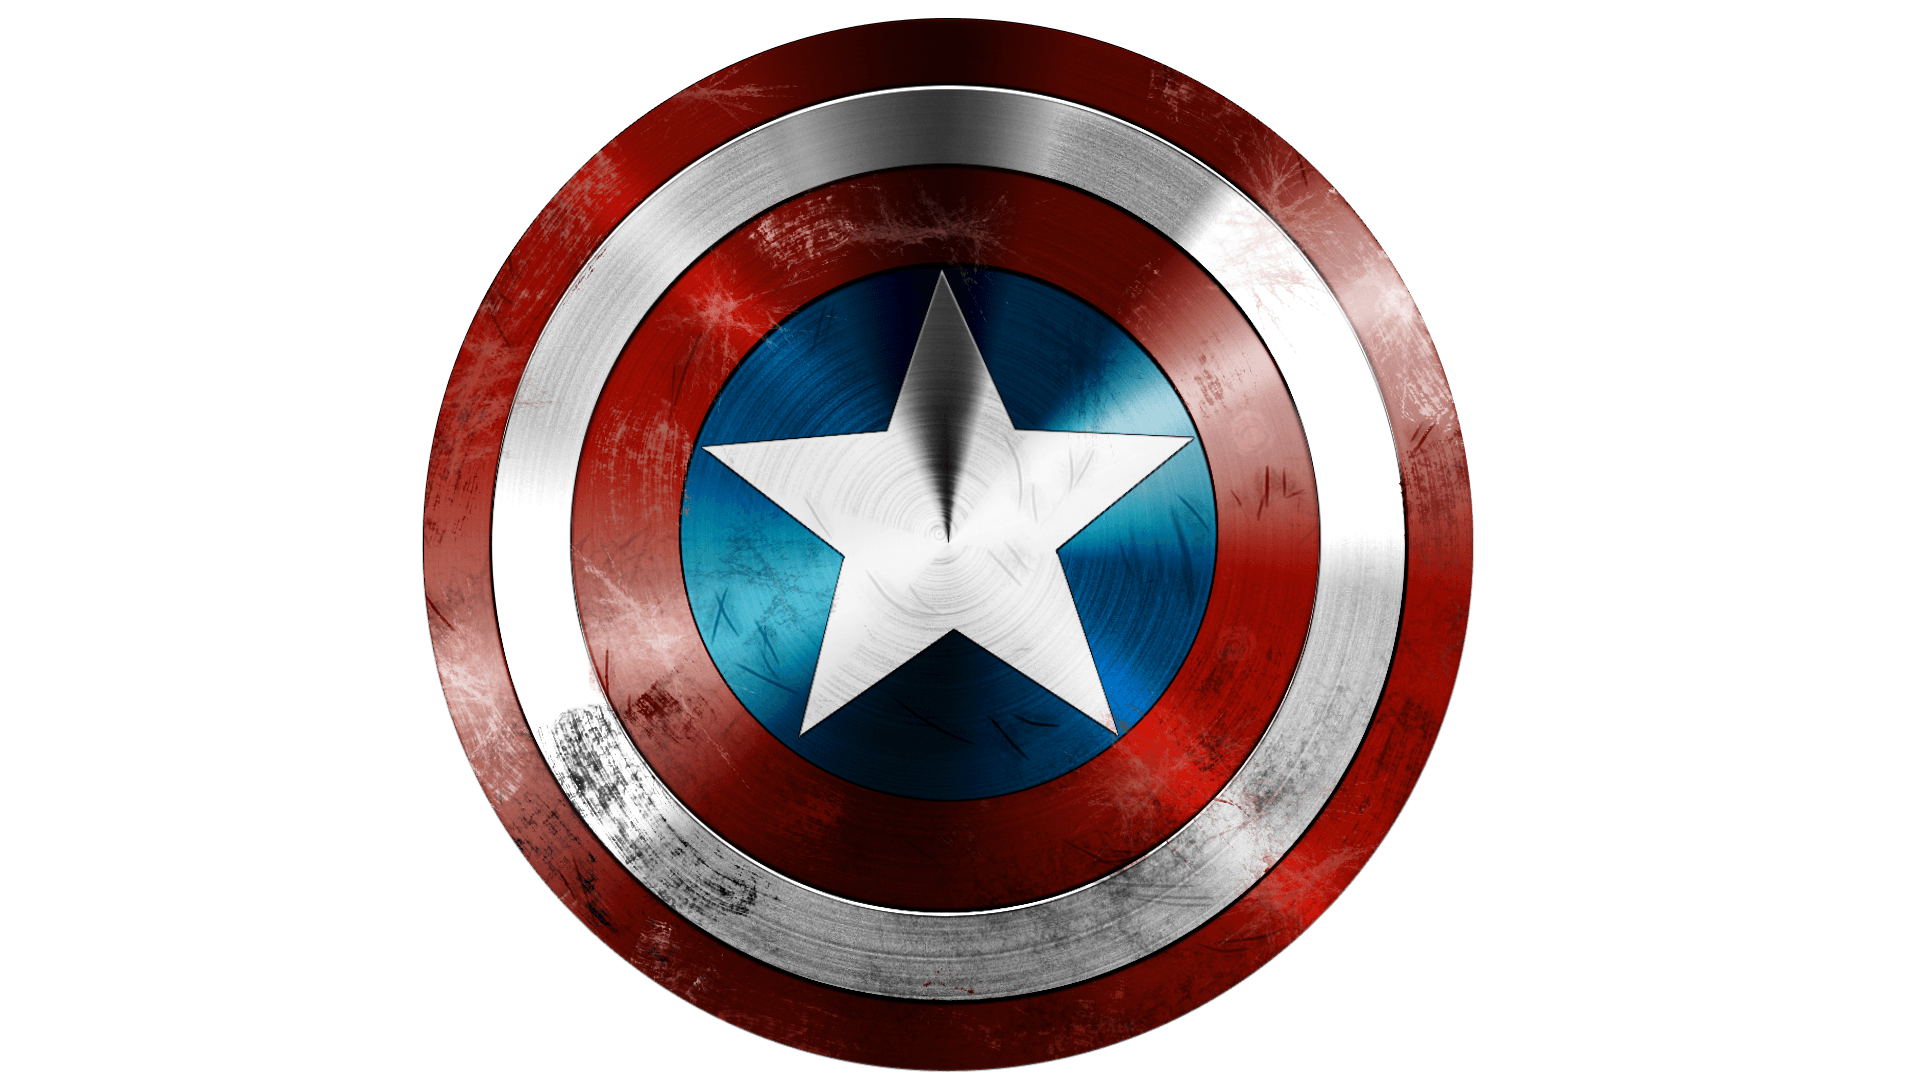 Captain America's Shield Wallpapers - Wallpaper Cave